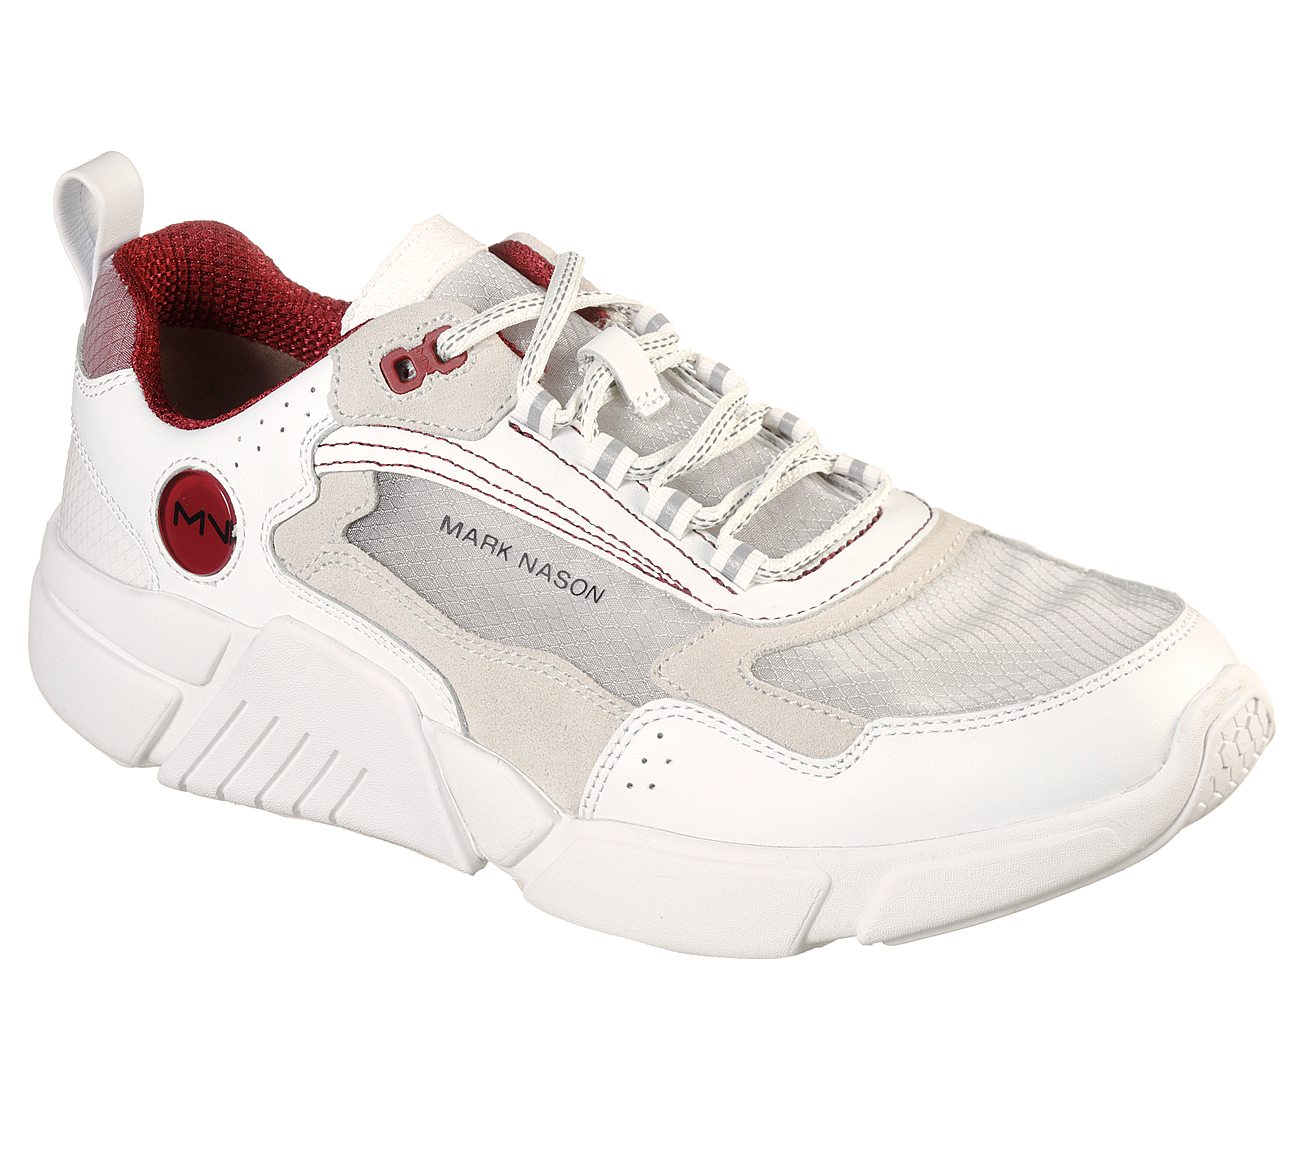 BLOCK - HAZE, WHITE/RED Footwear Lateral View